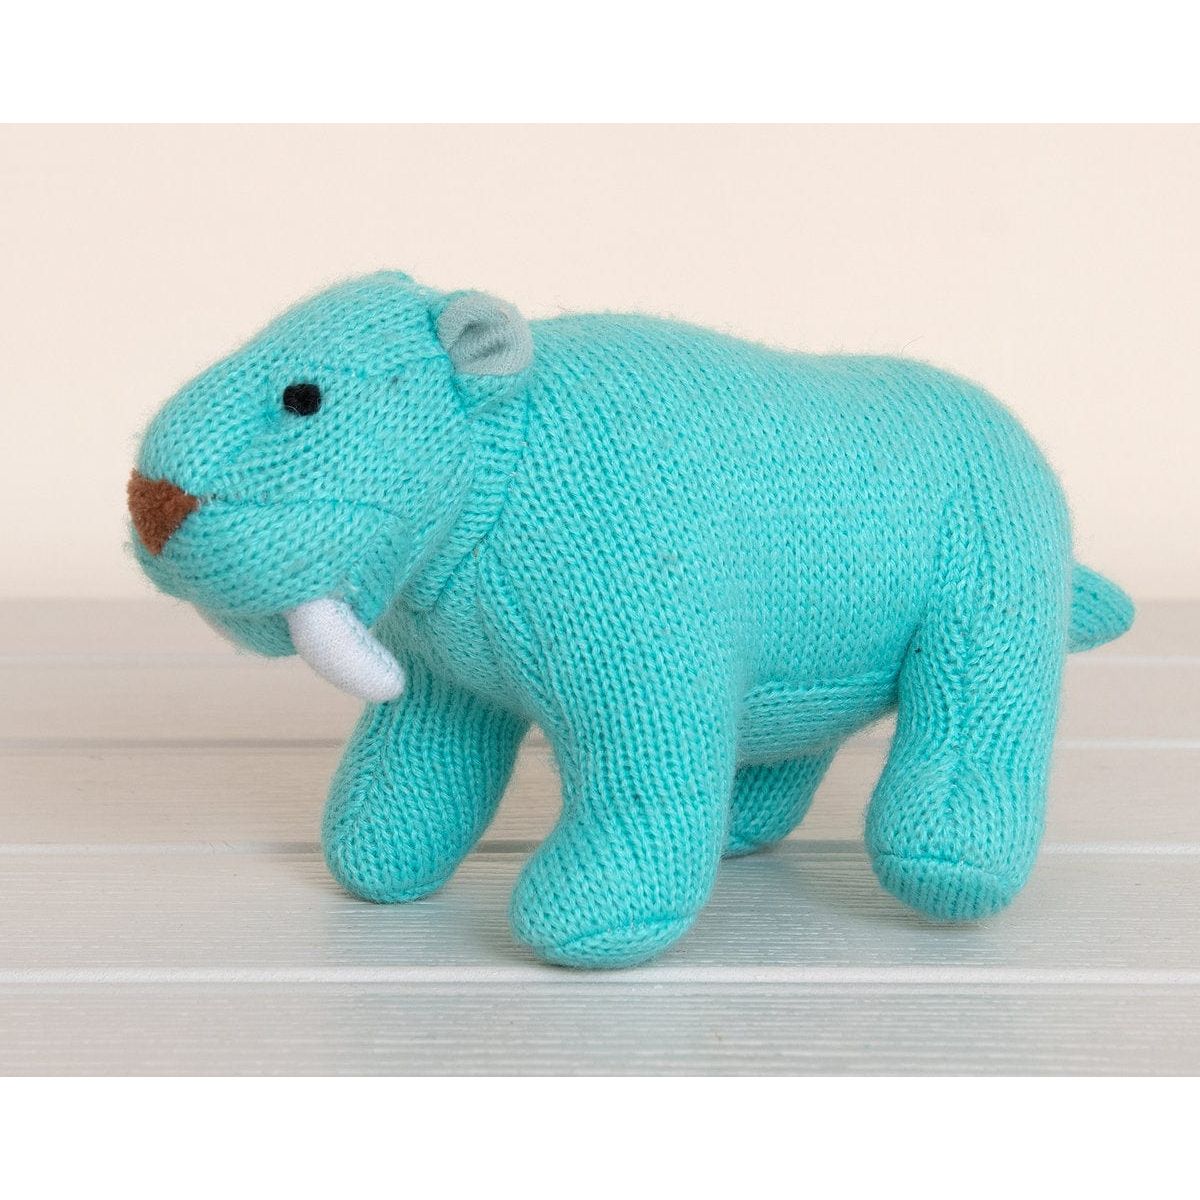 Best Years Ltd Knitted Blue Sabre Tooth Tiger Dinosaur Rattle